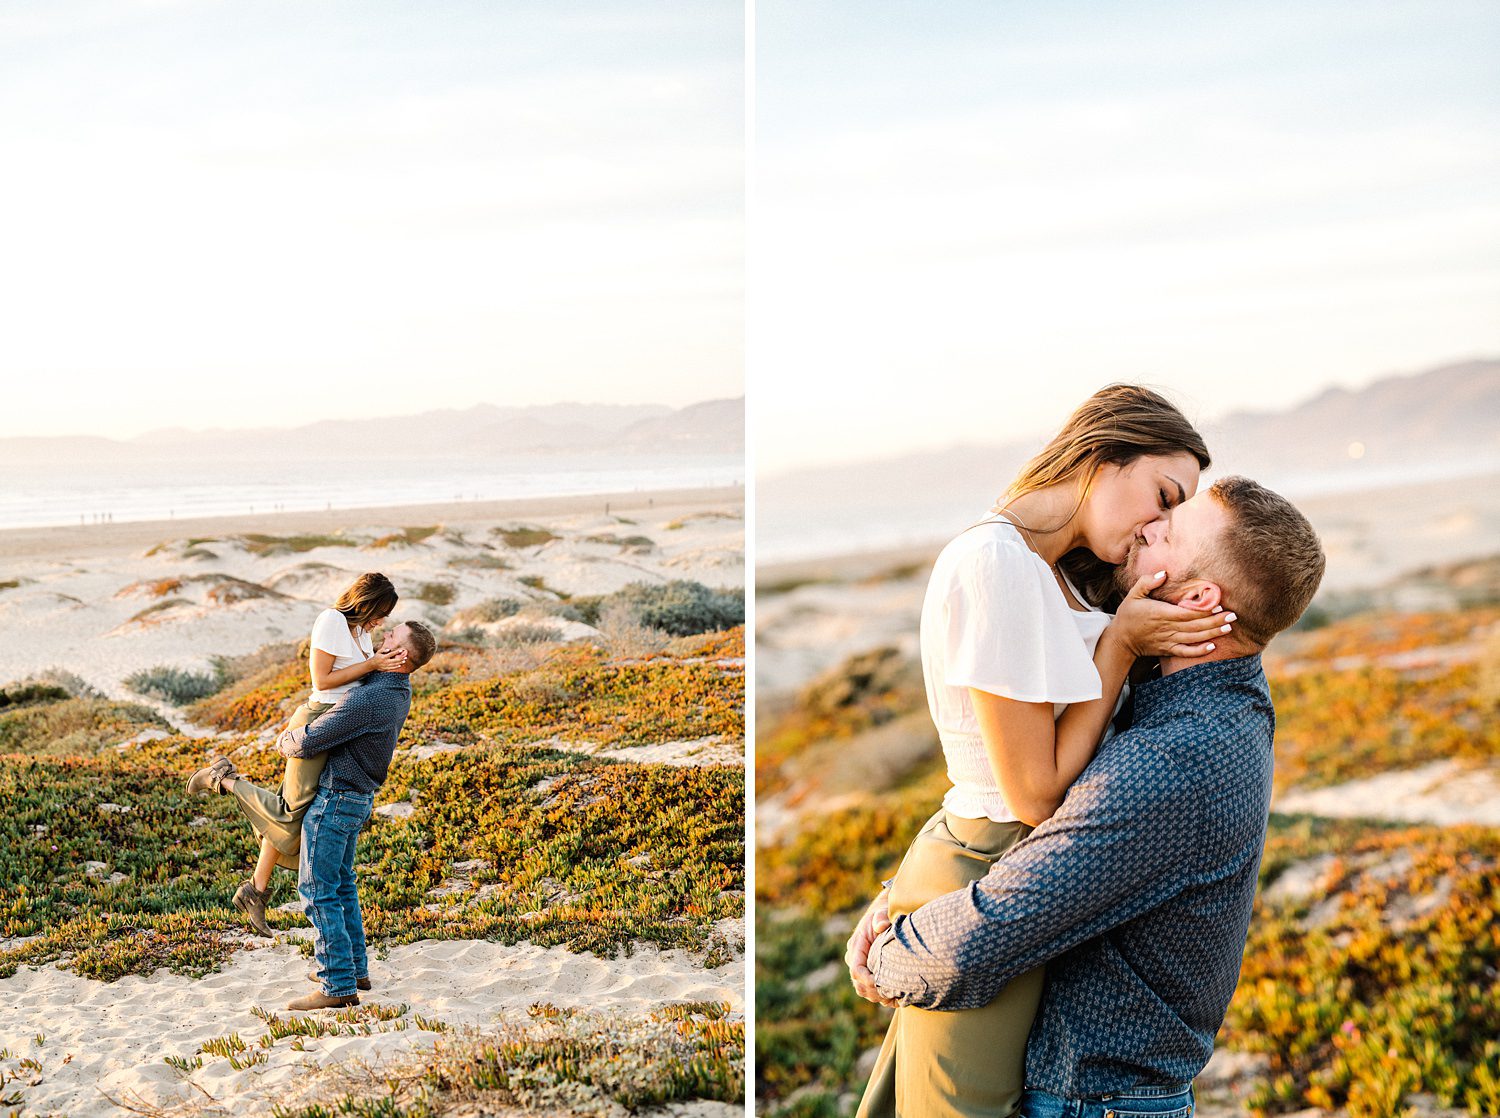 Guy lifting up his fiancé during sunset on Pismo Beach Dunes by Pismo Beach Wedding Photographer Austyn Elizabeth Photography